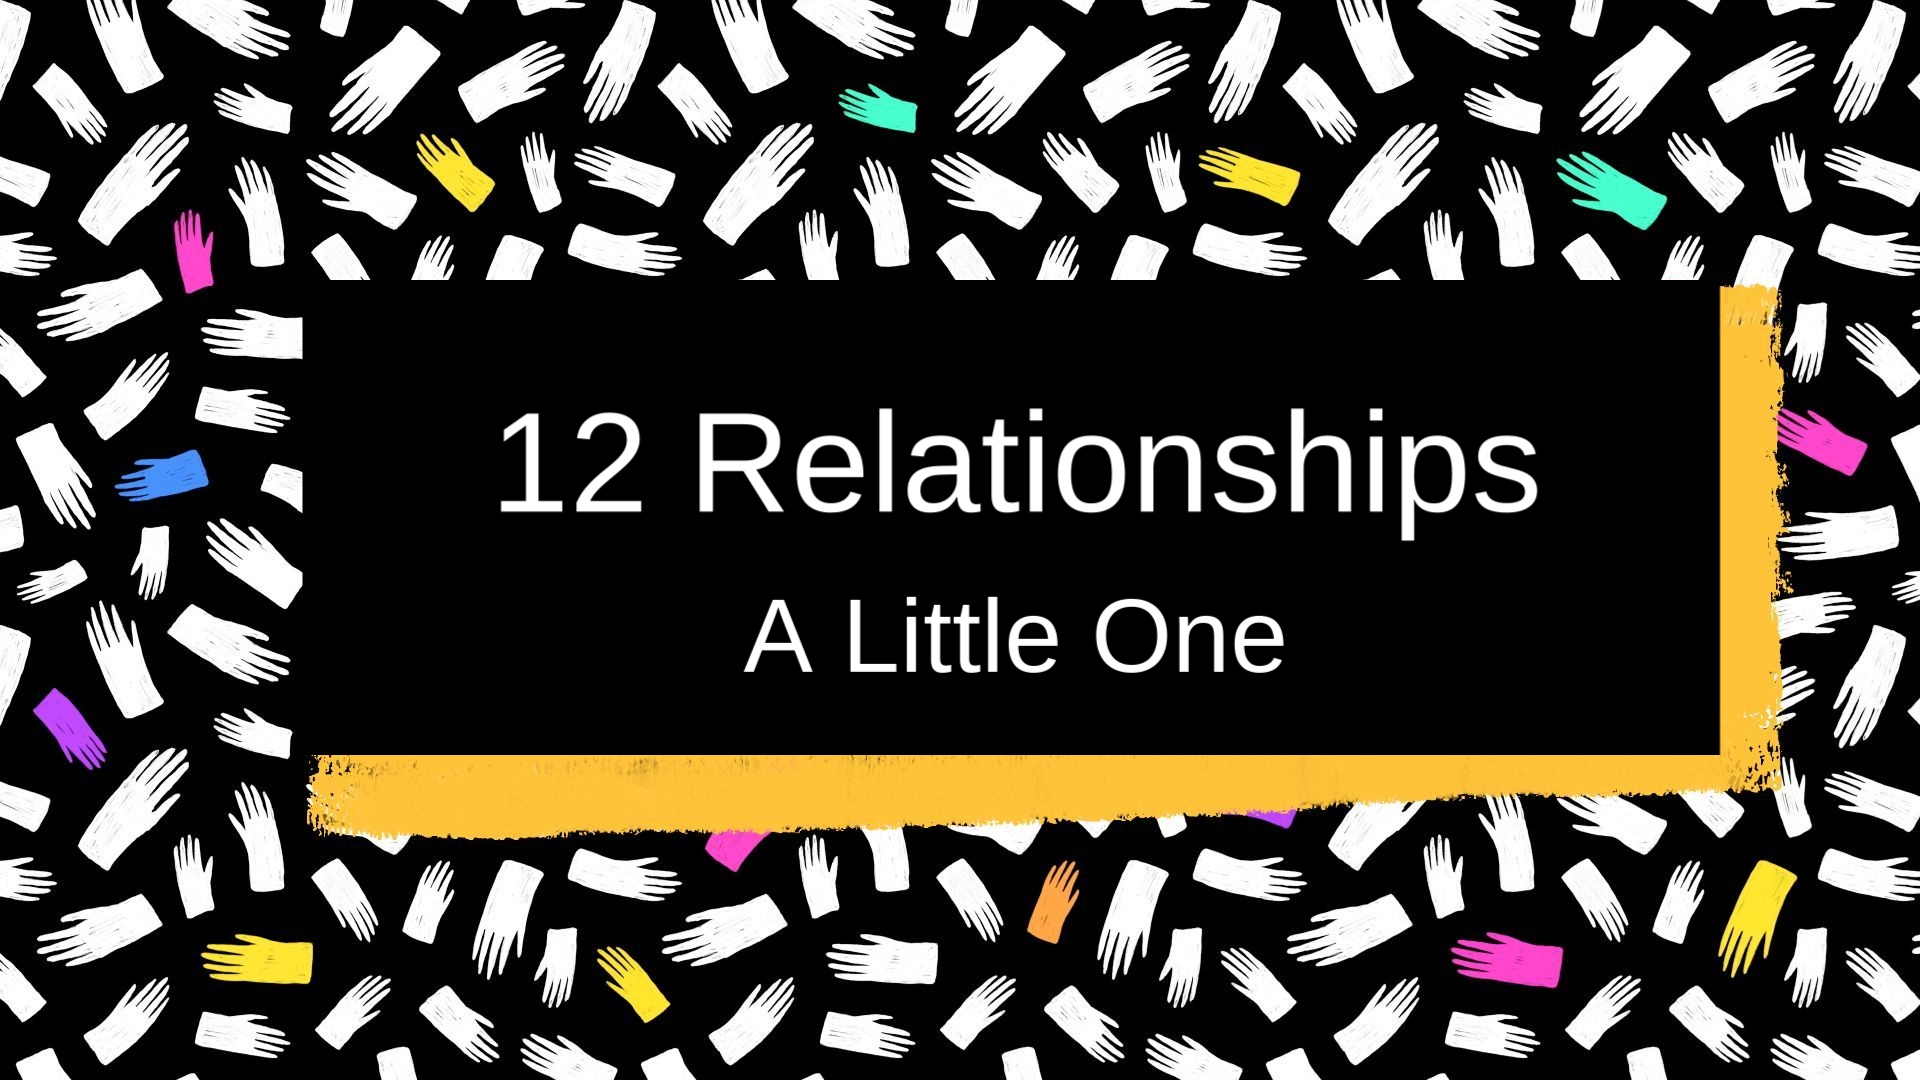 12 Relationships: A Little One